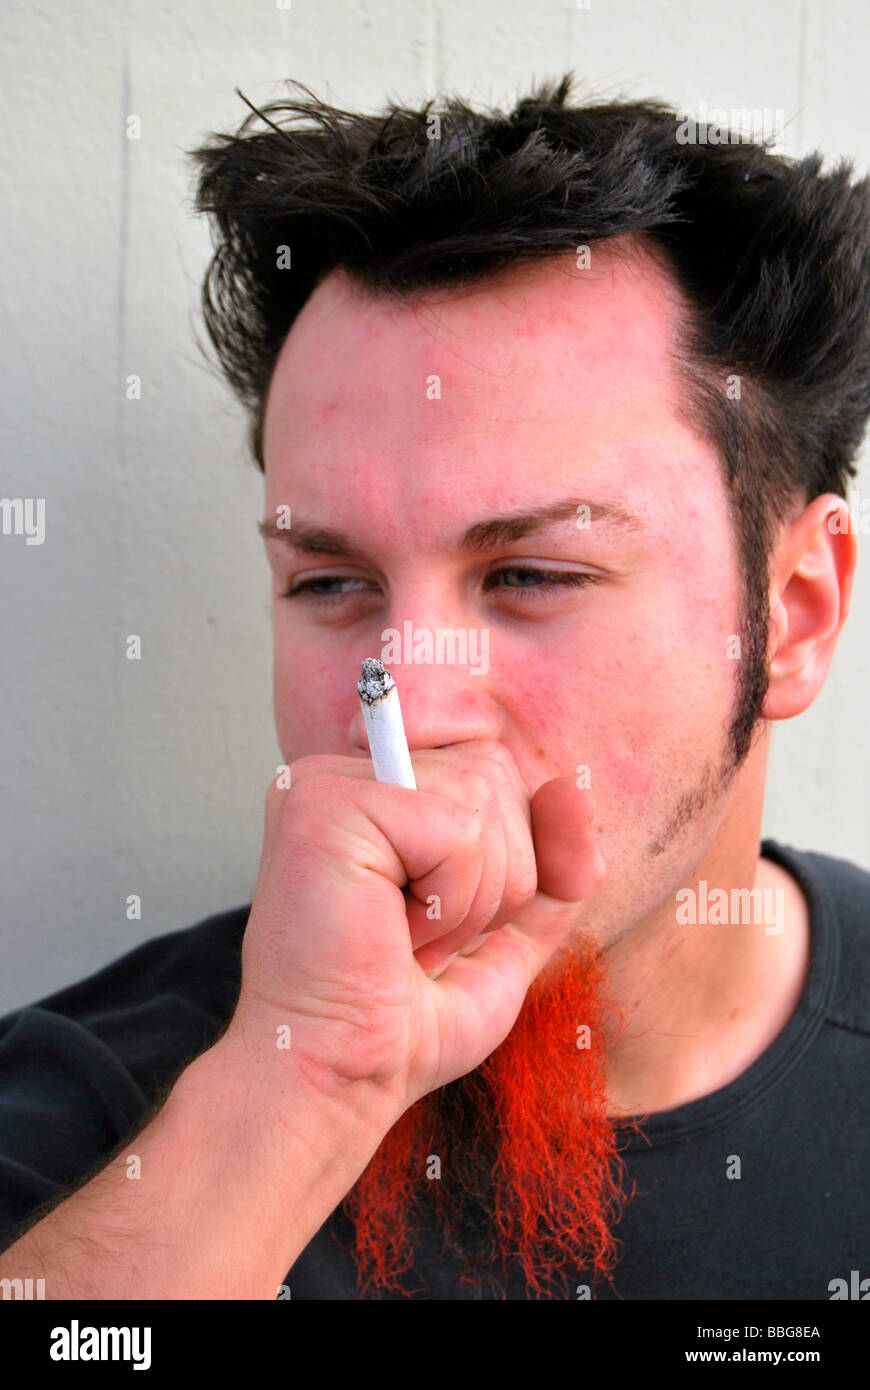 Smoking weed, young man with red-black beard smoking a joint, hand-rolled cigarette Stock Photo